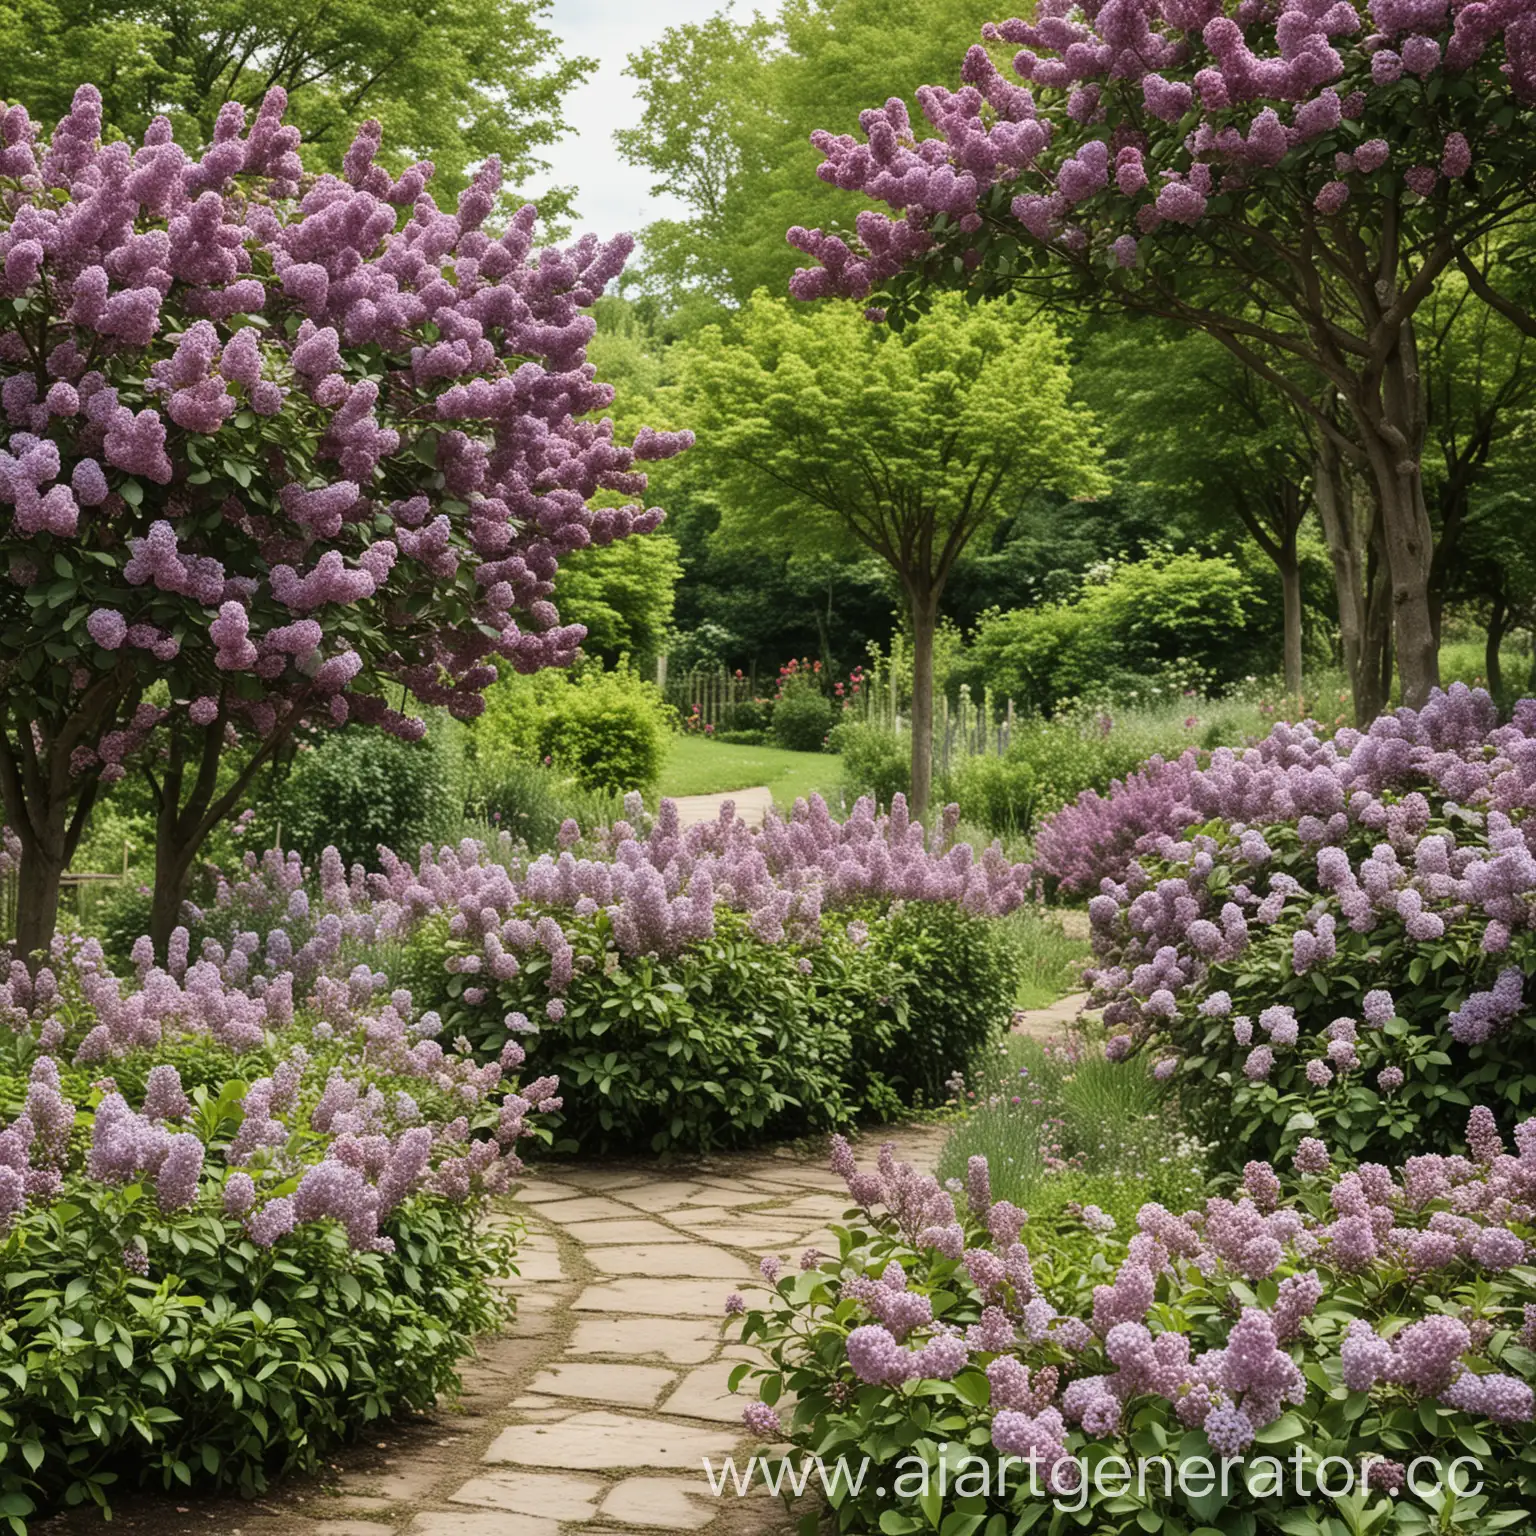 Tranquil-Garden-Landscape-with-Lilac-Bushes-and-Trees